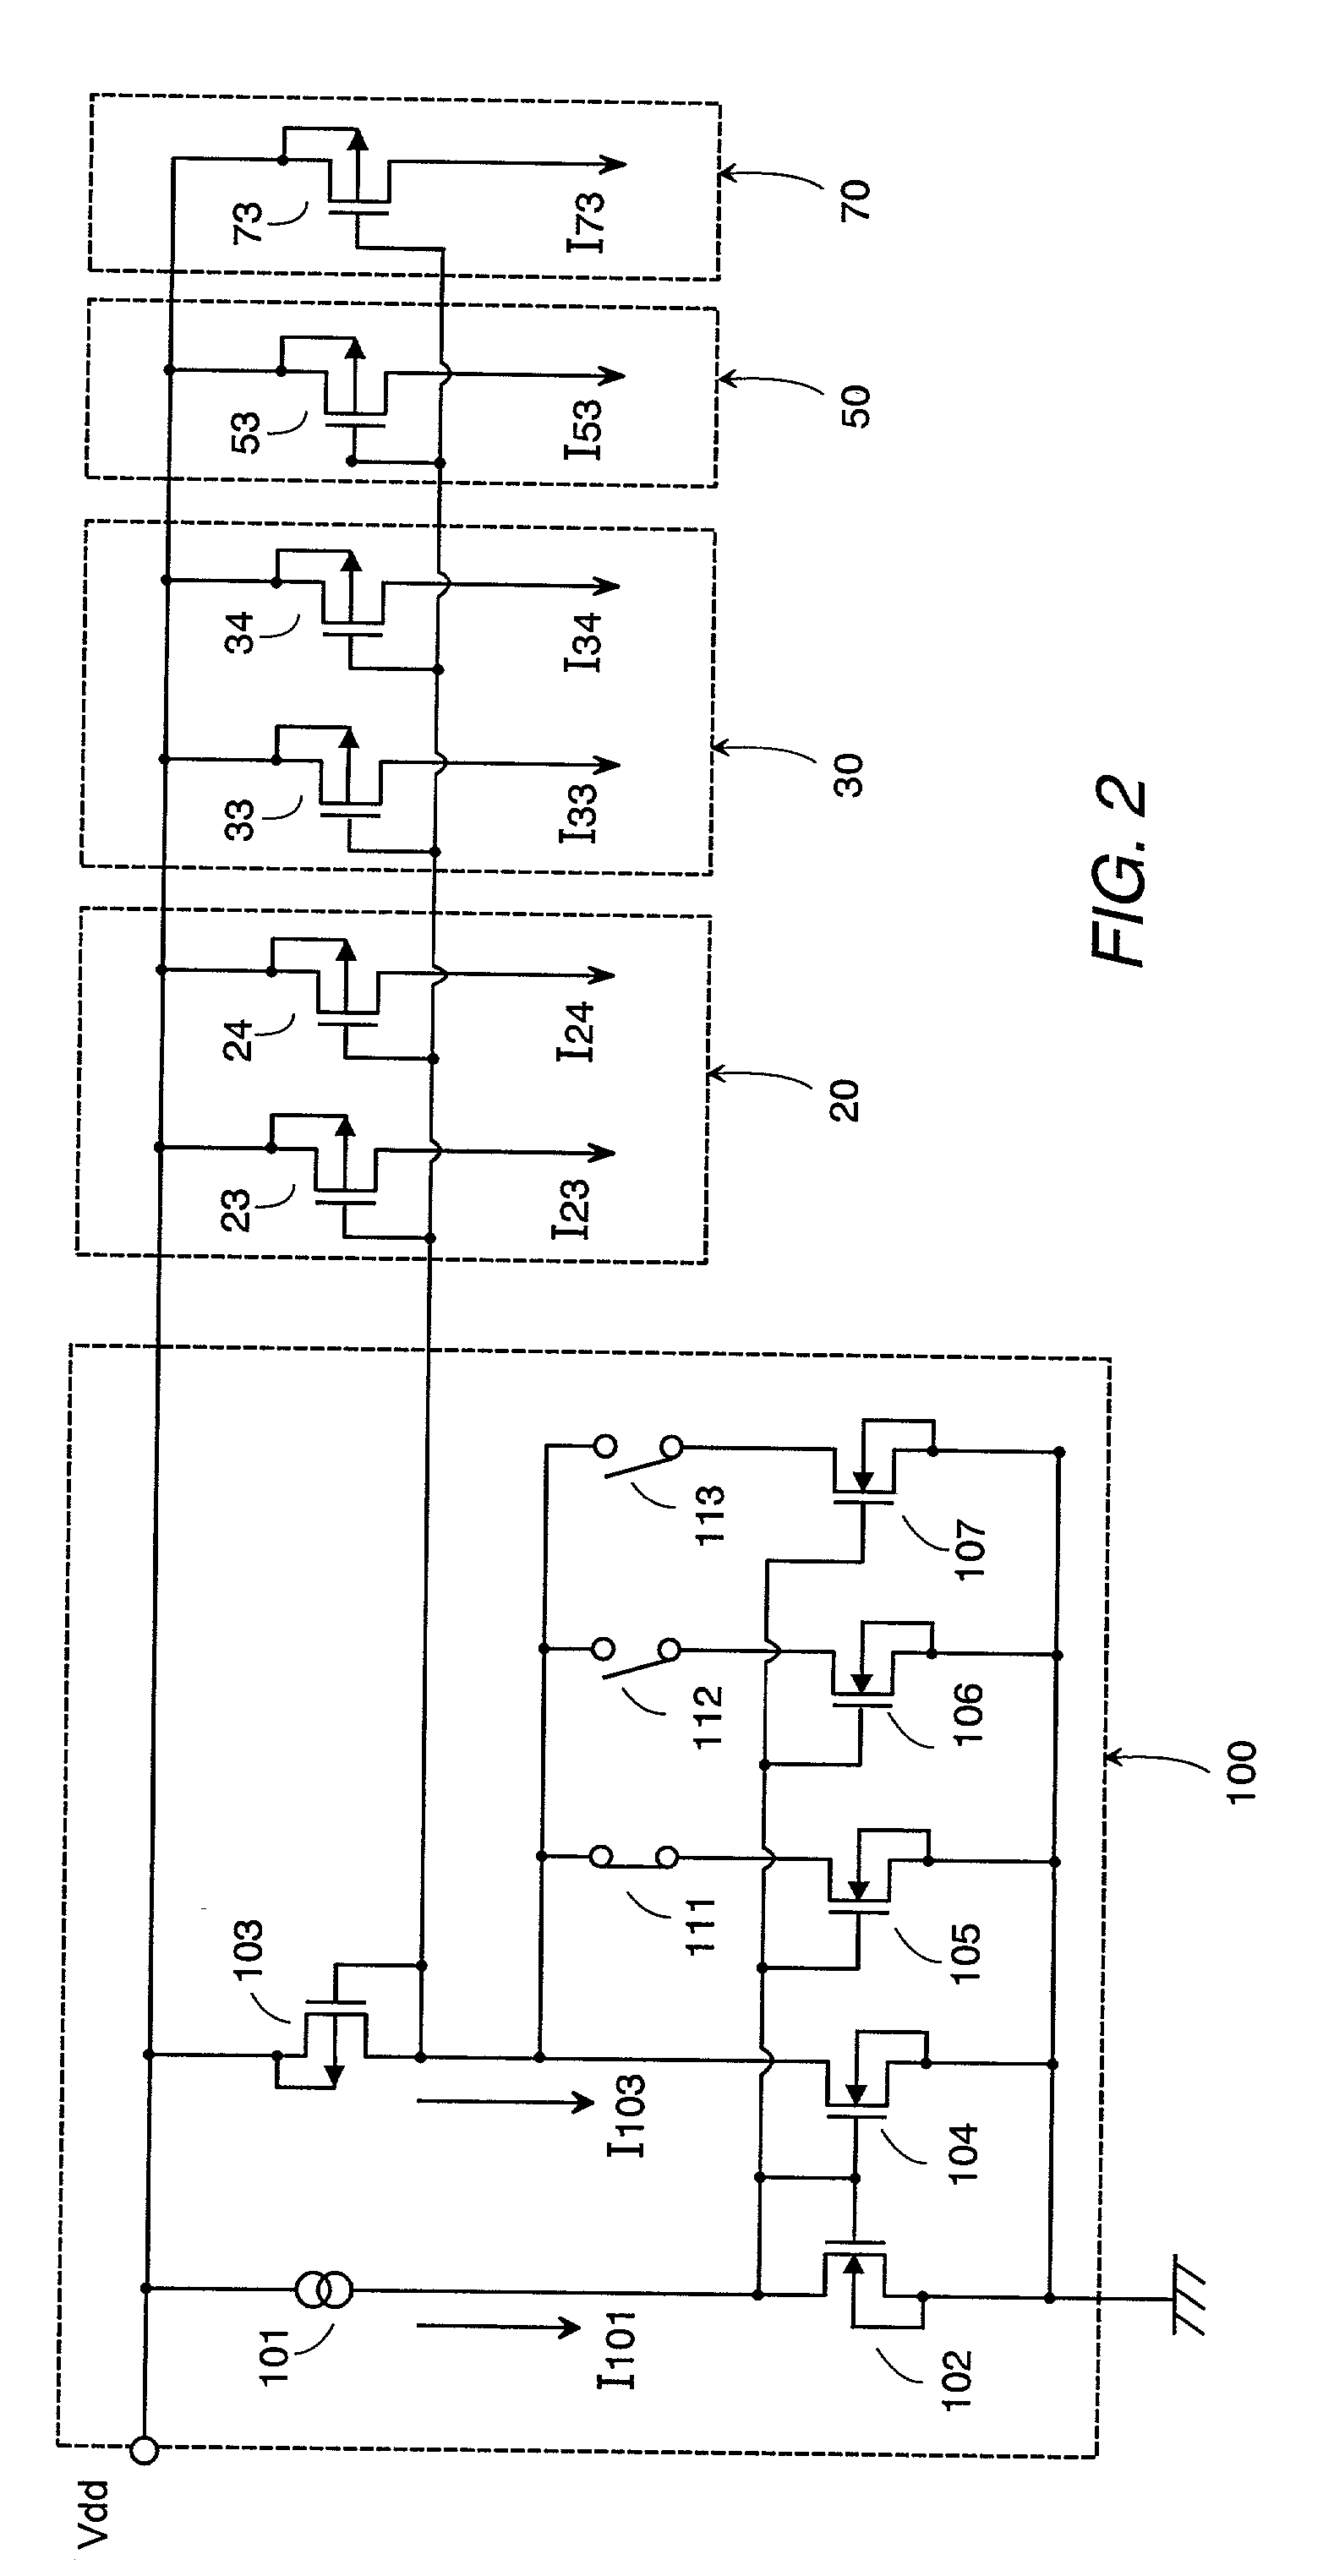 Object detecting device with a pyroelectric sensor